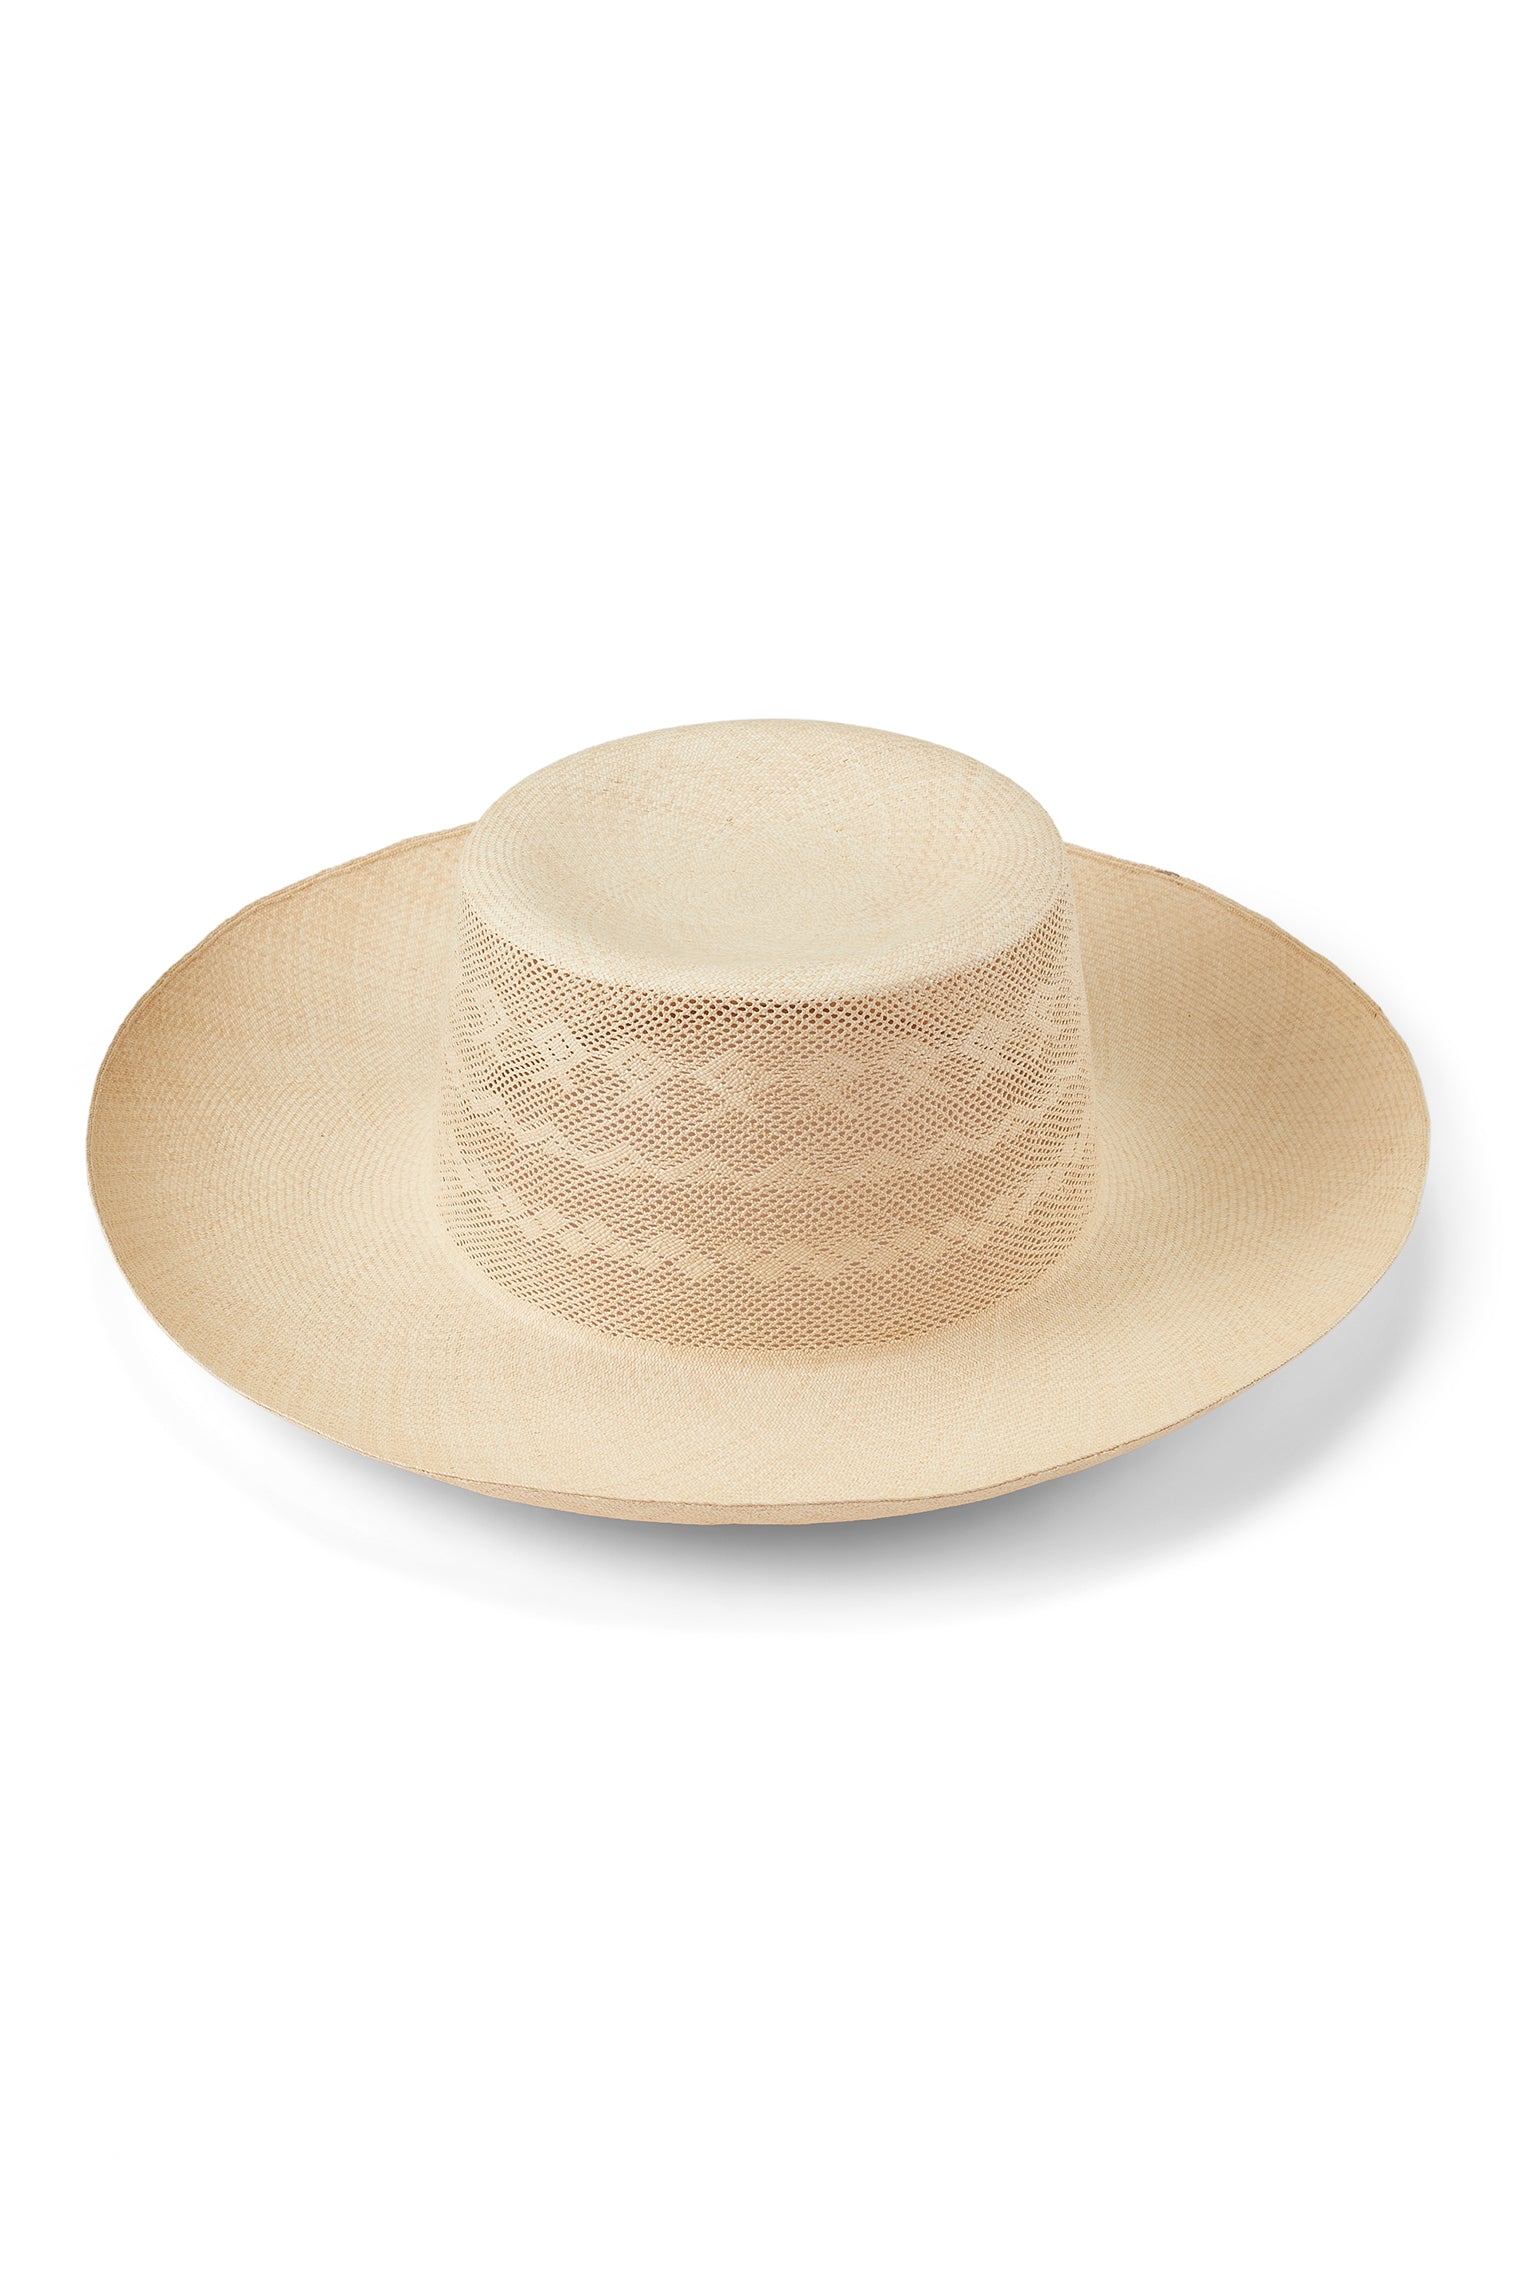 Lily Woven Panama - The Bespoke Embroidered Panama Hat Collection - Lock & Co. Hatters London UK